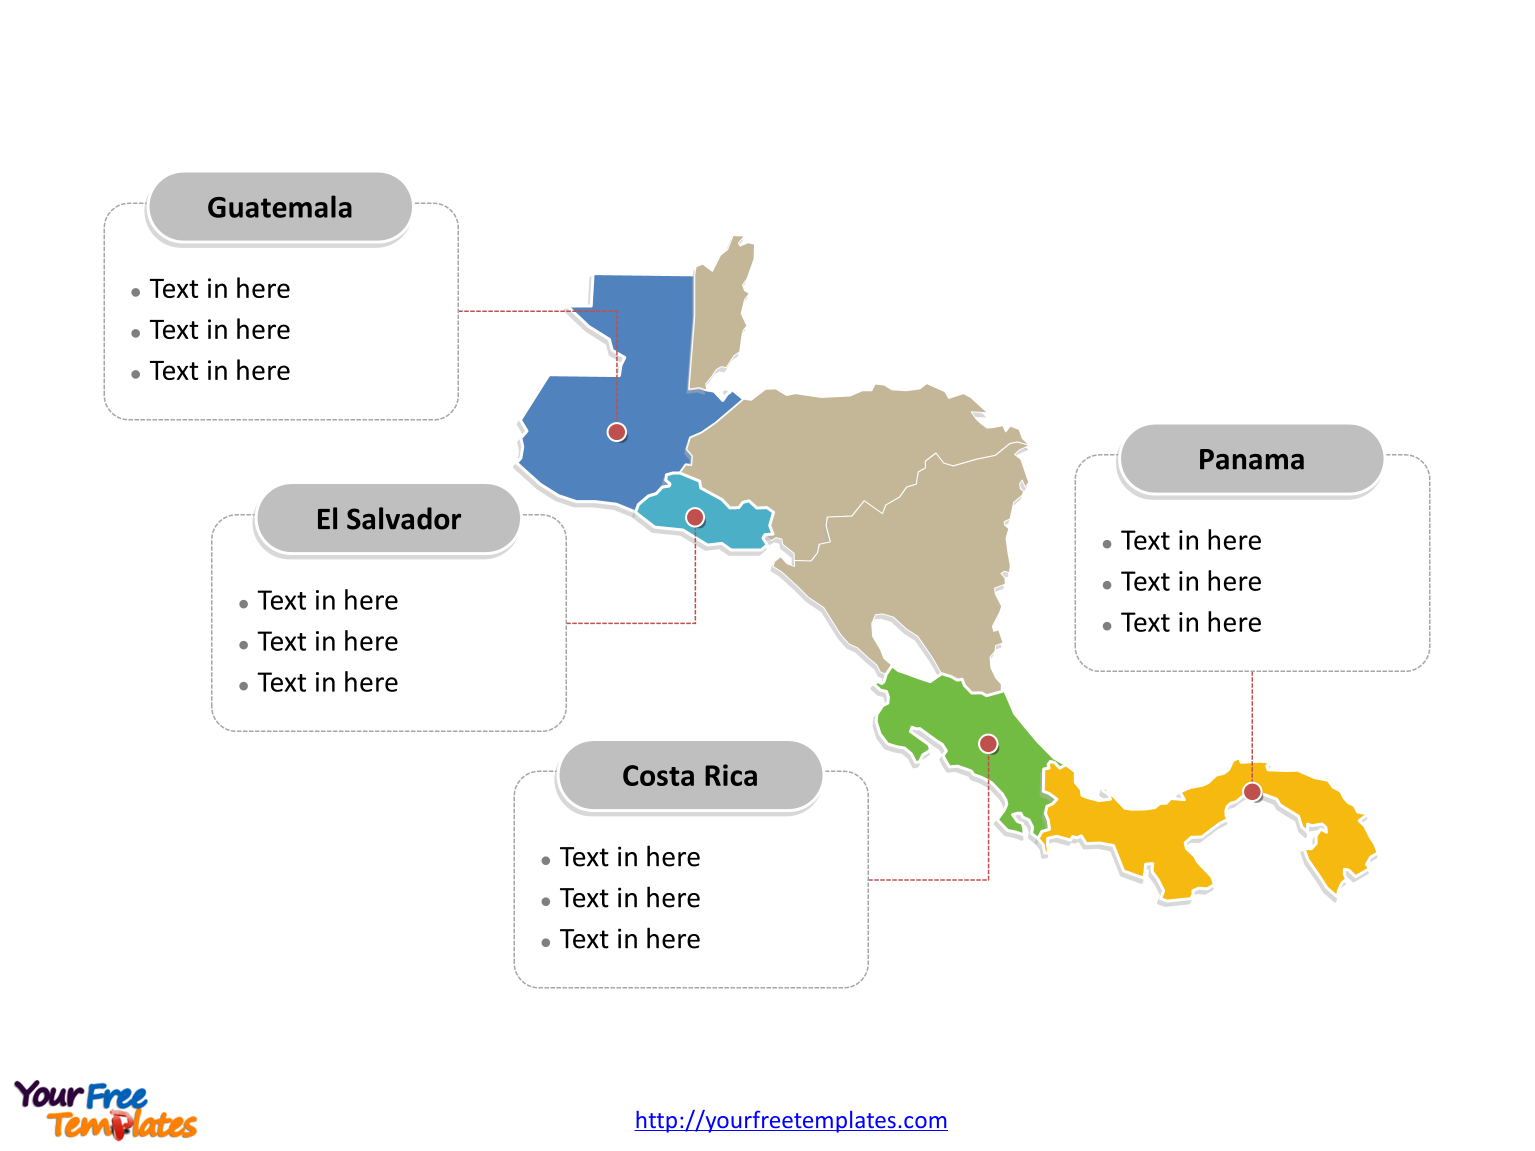 Central America Outline map labeled with major capitals